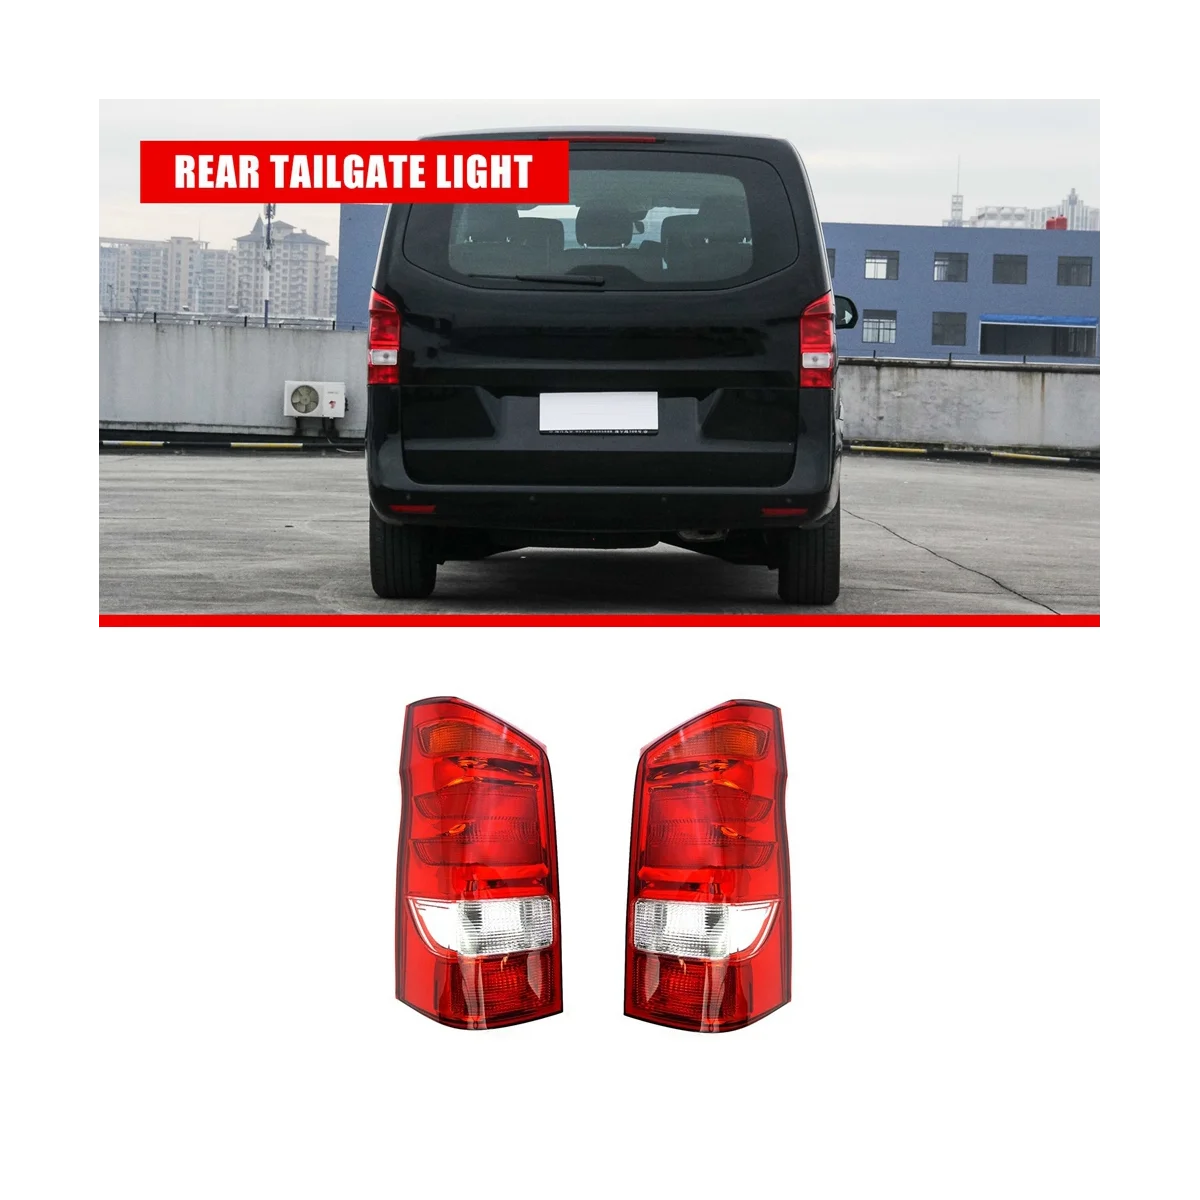 

Car Rear Tailgate Tail Light Lamp for Mercedes Benz VITO W447 2015+ Left